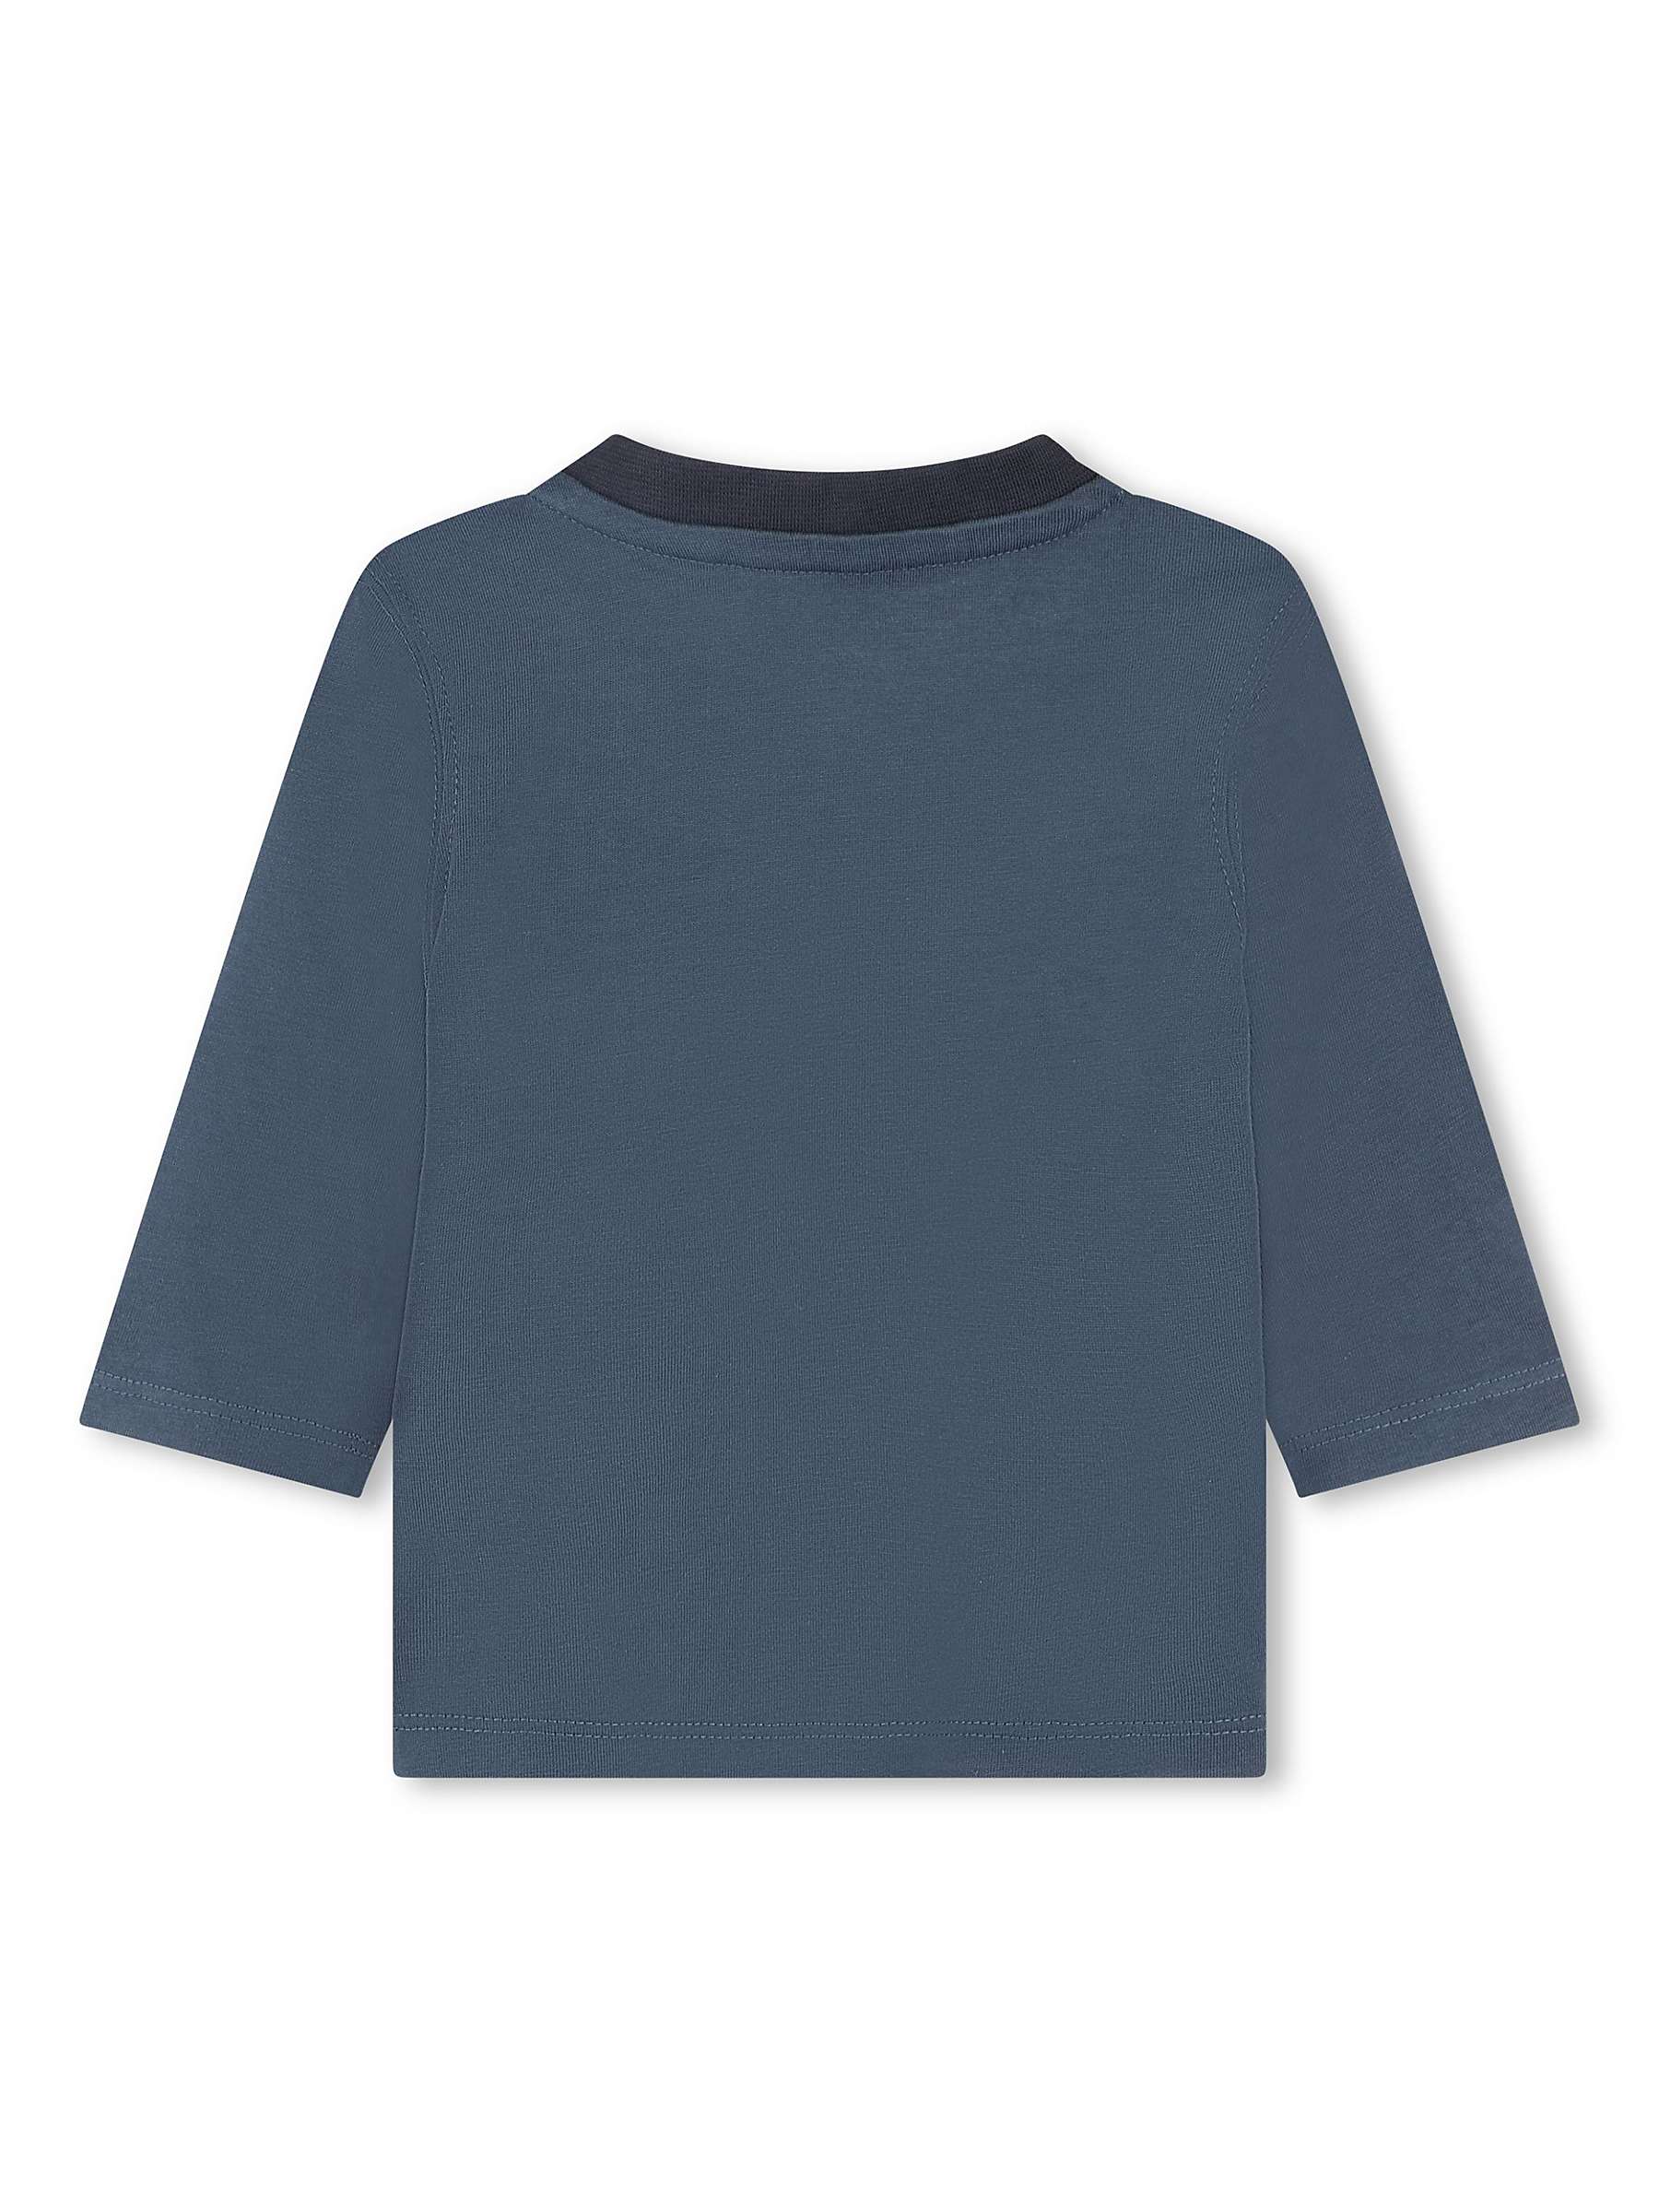 Buy Timberland Baby Graphic Logo Long Sleeve T-Shirt, Blue/Multi Online at johnlewis.com